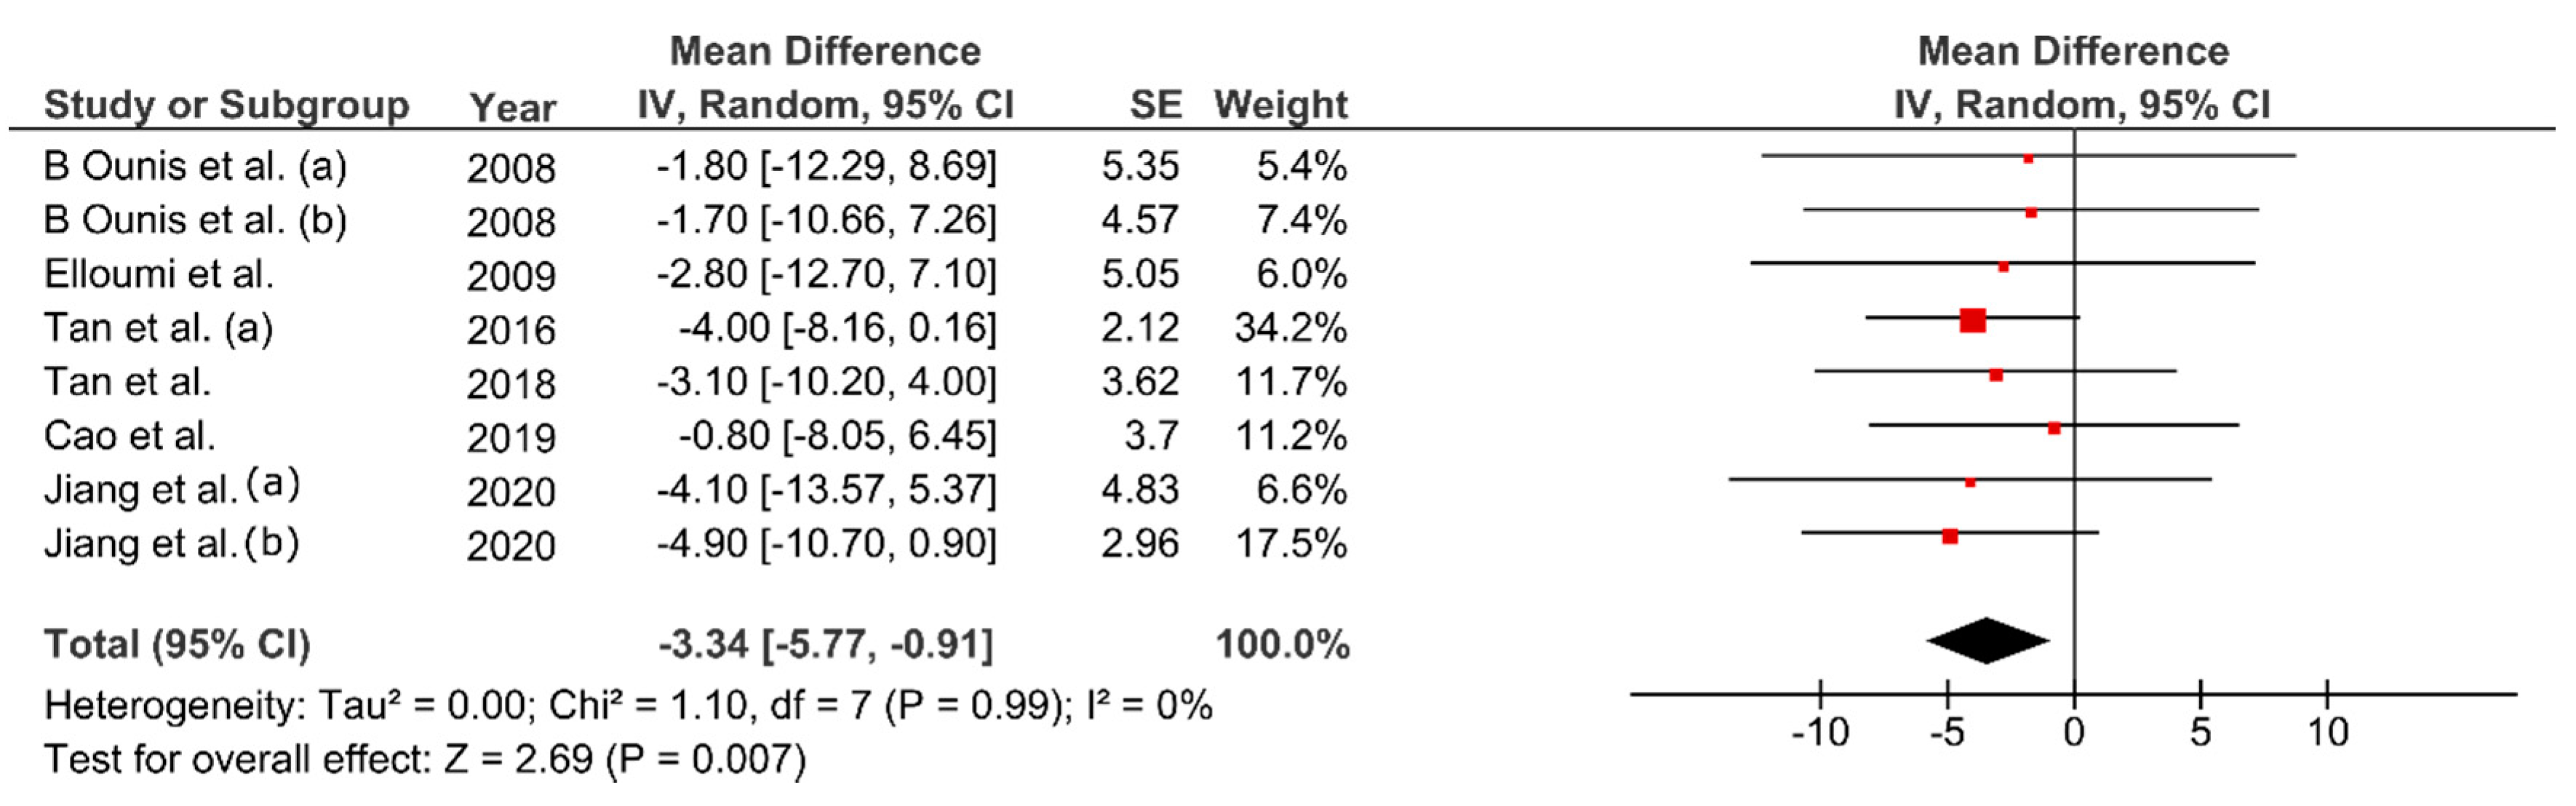 Ijerph Free Full Text Chronic Effect Of Fatmax Training On Body Weight Fat Mass And Cardiorespiratory Fitness In Obese Subjects A Meta Analysis Of Randomized Clinical Trials Html